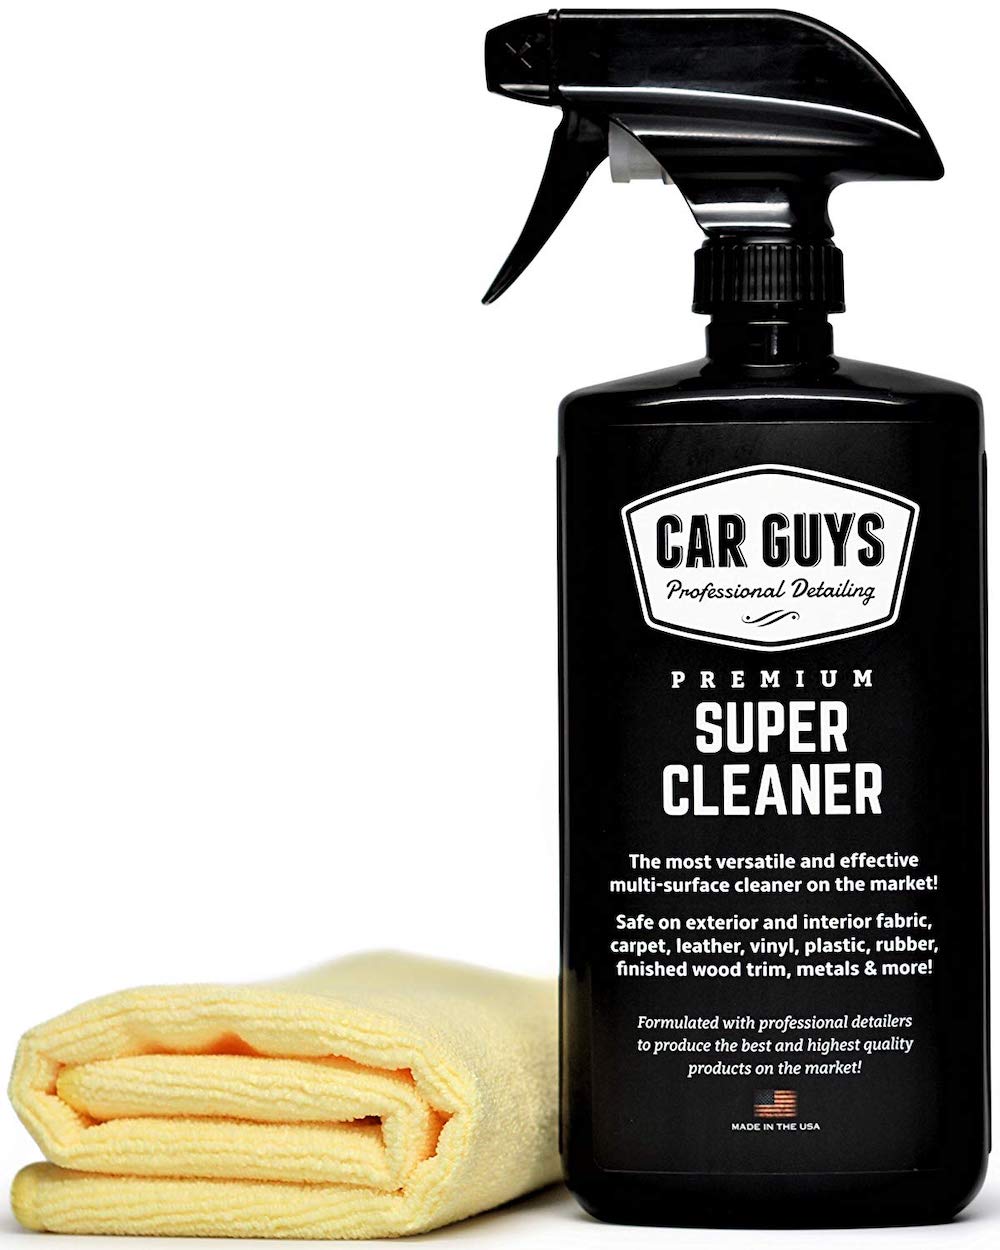 8 Fast Car Cleaning Products to Make Your Car Shine Super Cleaner #Cleaning #CarCleaning #CleanCar #QuickAndEasy #SaveMoney #SaveTime #BudgetFriendly 